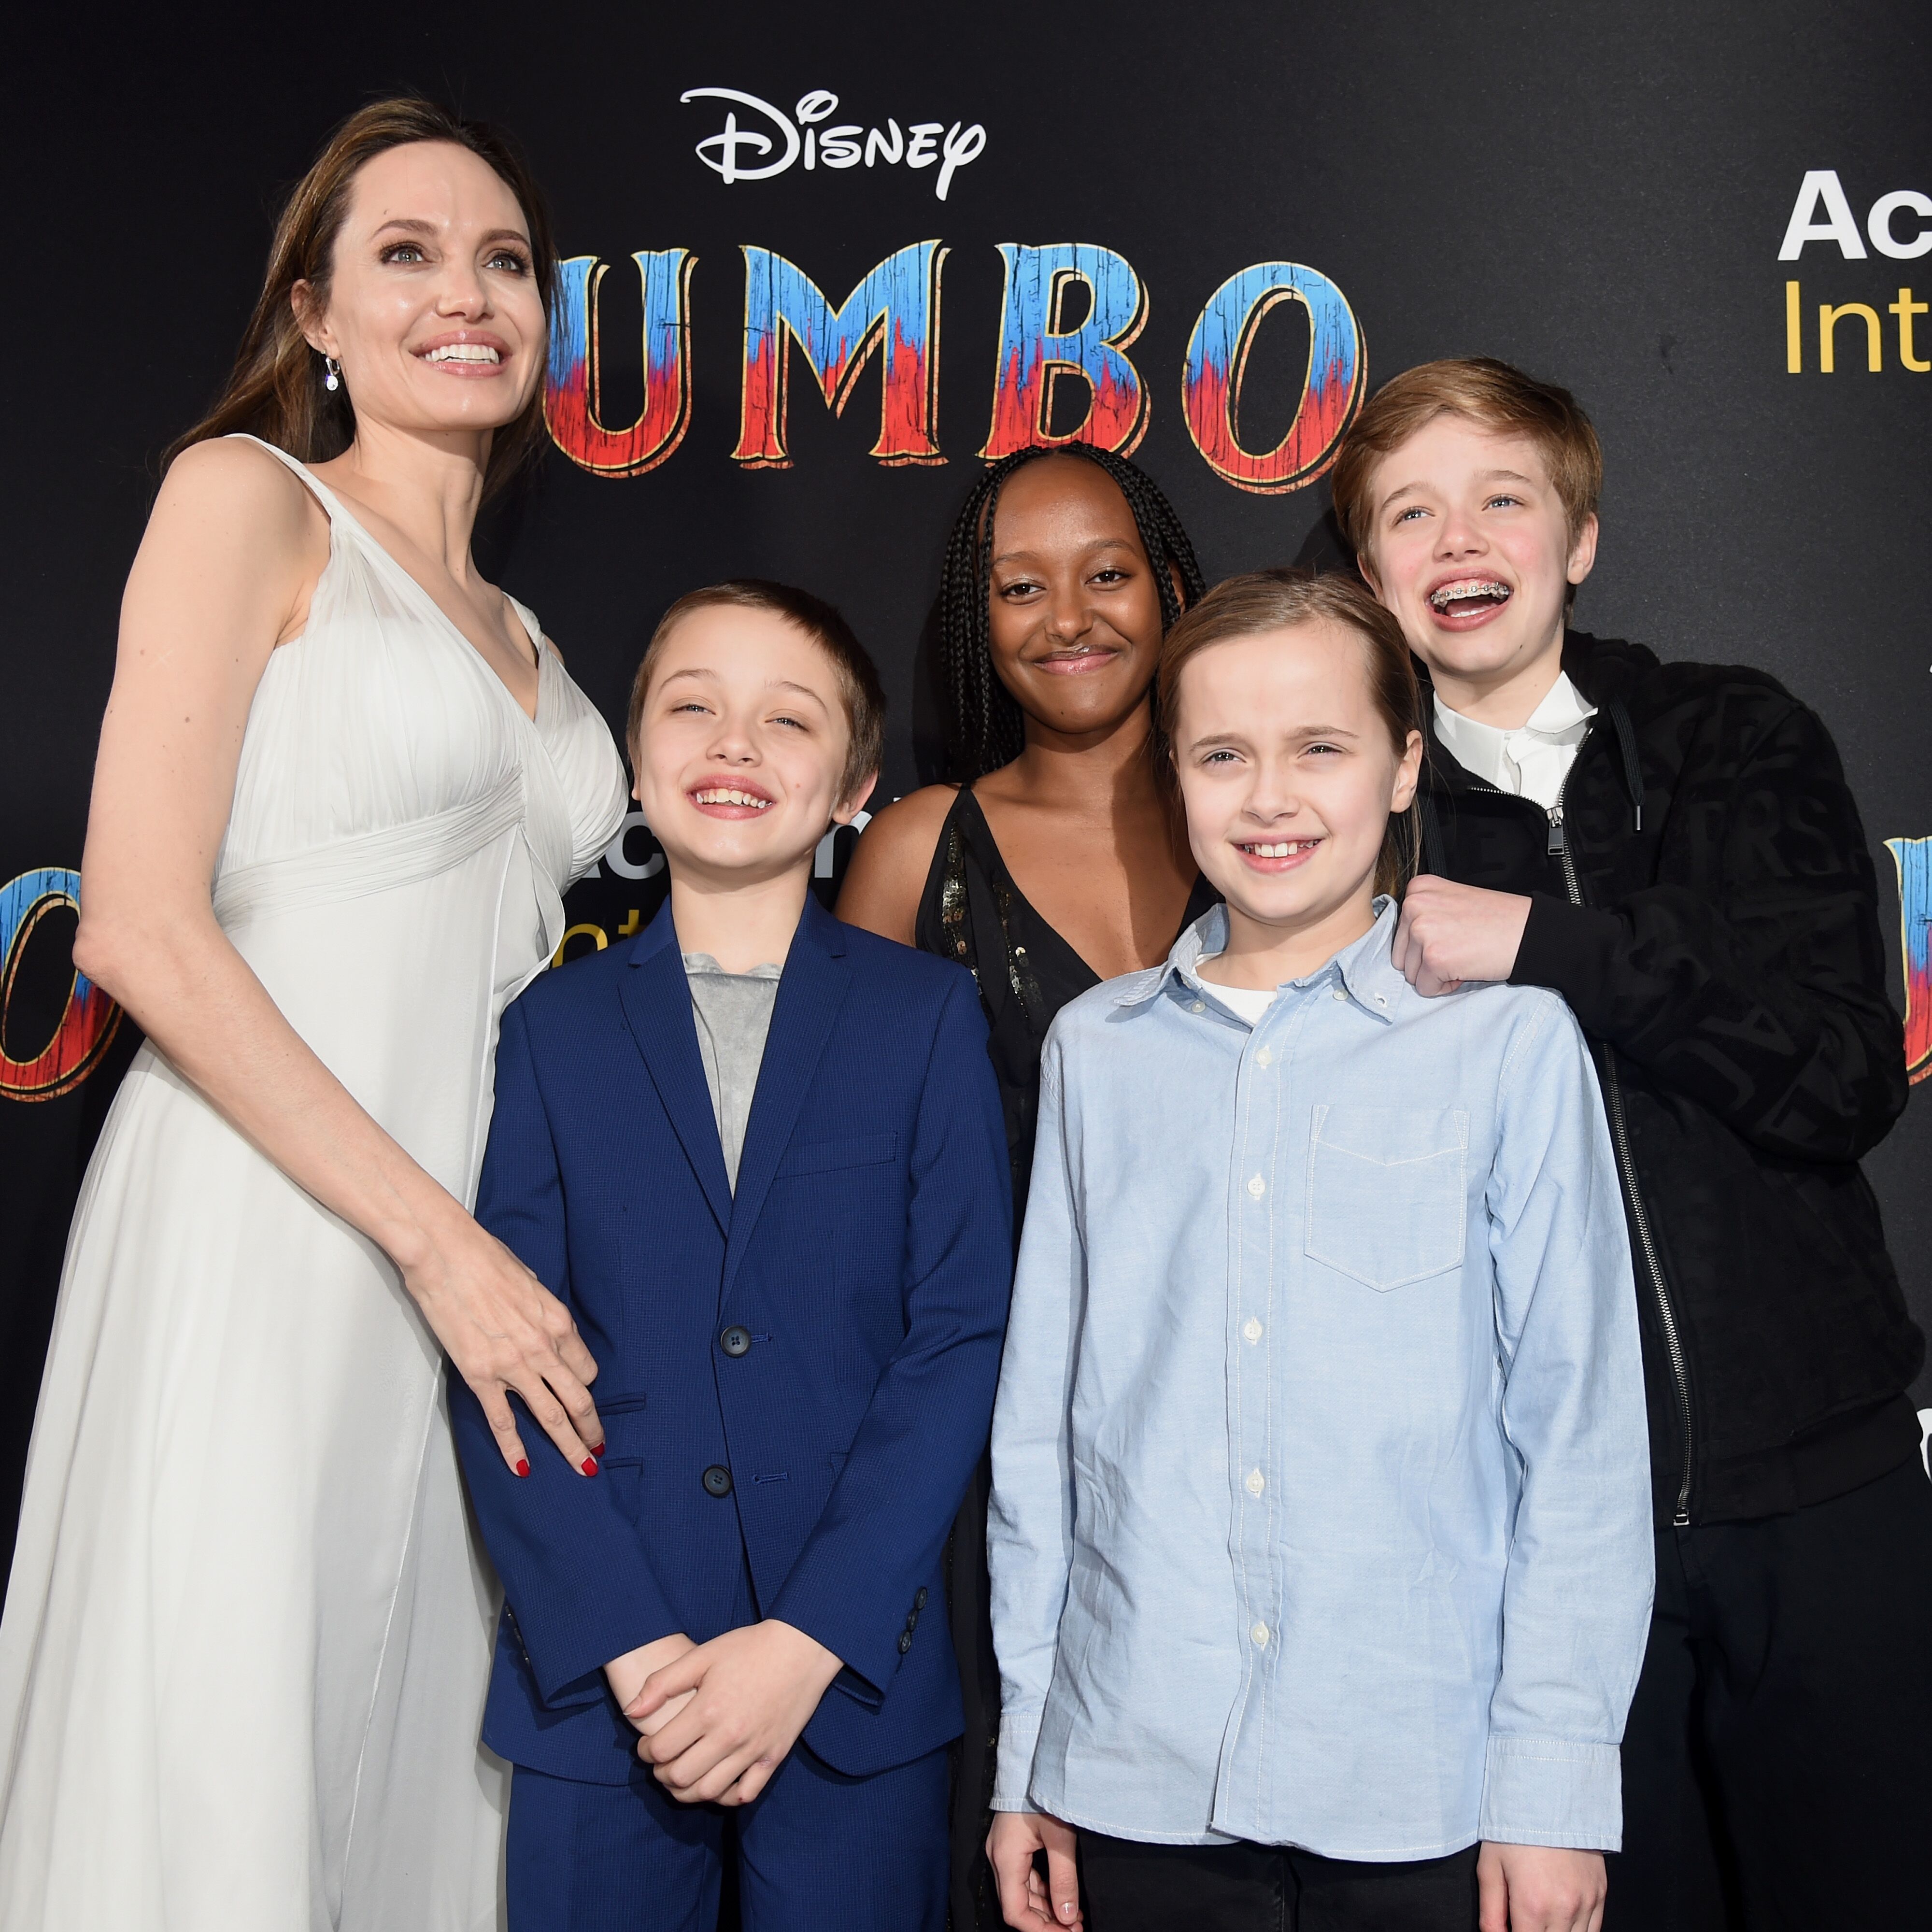 Angelina Jolie, Knox Leon Jolie-Pitt, Zahara Marley Jolie-Pitt, Vivienne Marcheline Jolie-Pitt, and Shiloh Nouvel Jolie-Pitt attend the premiere of Disney's "Dumbo" in 2019 in Los Angeles | Source: Getty Images